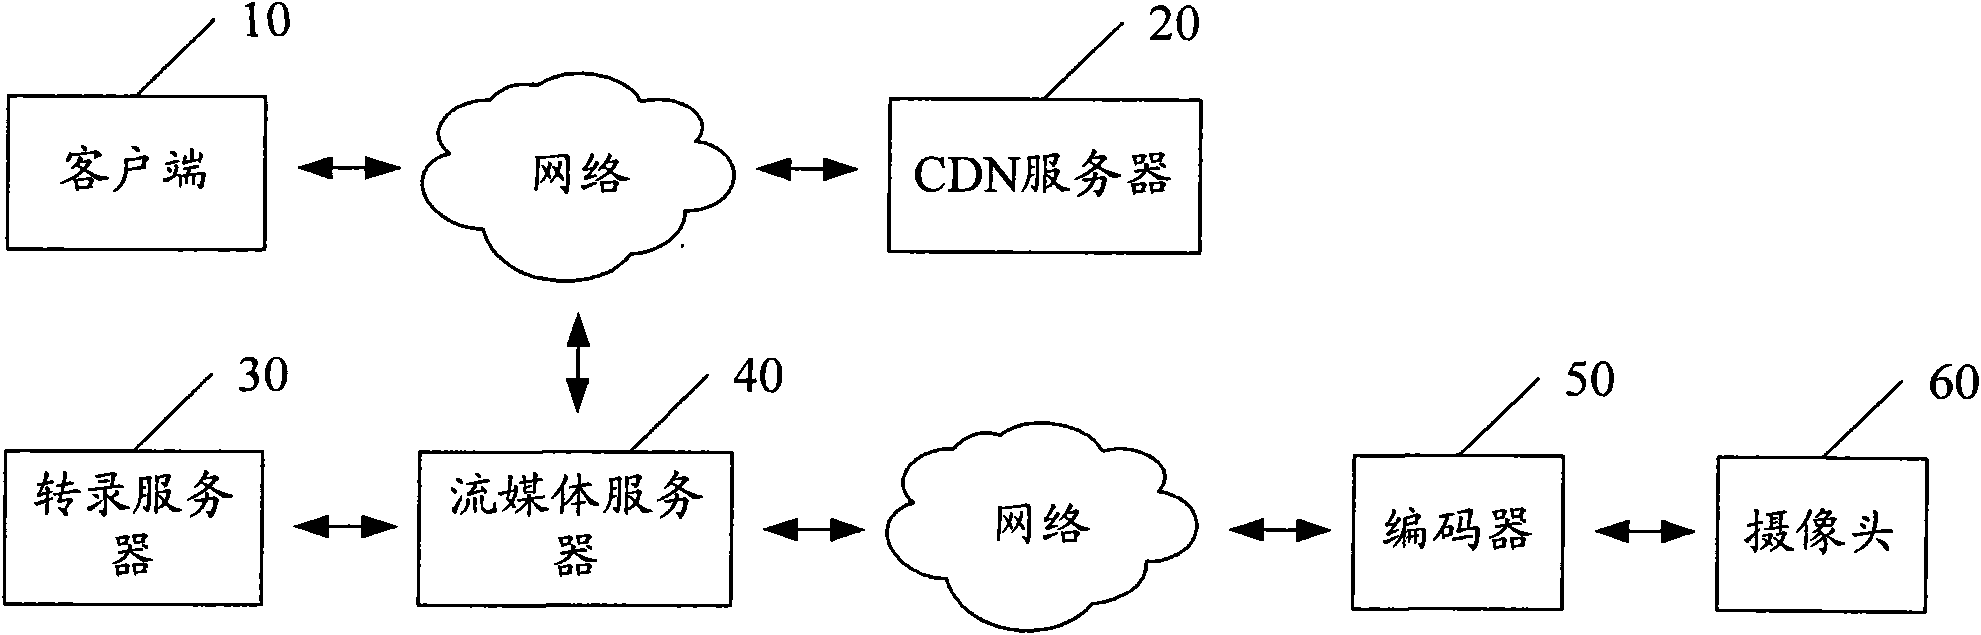 Method and system for generating and playing network video